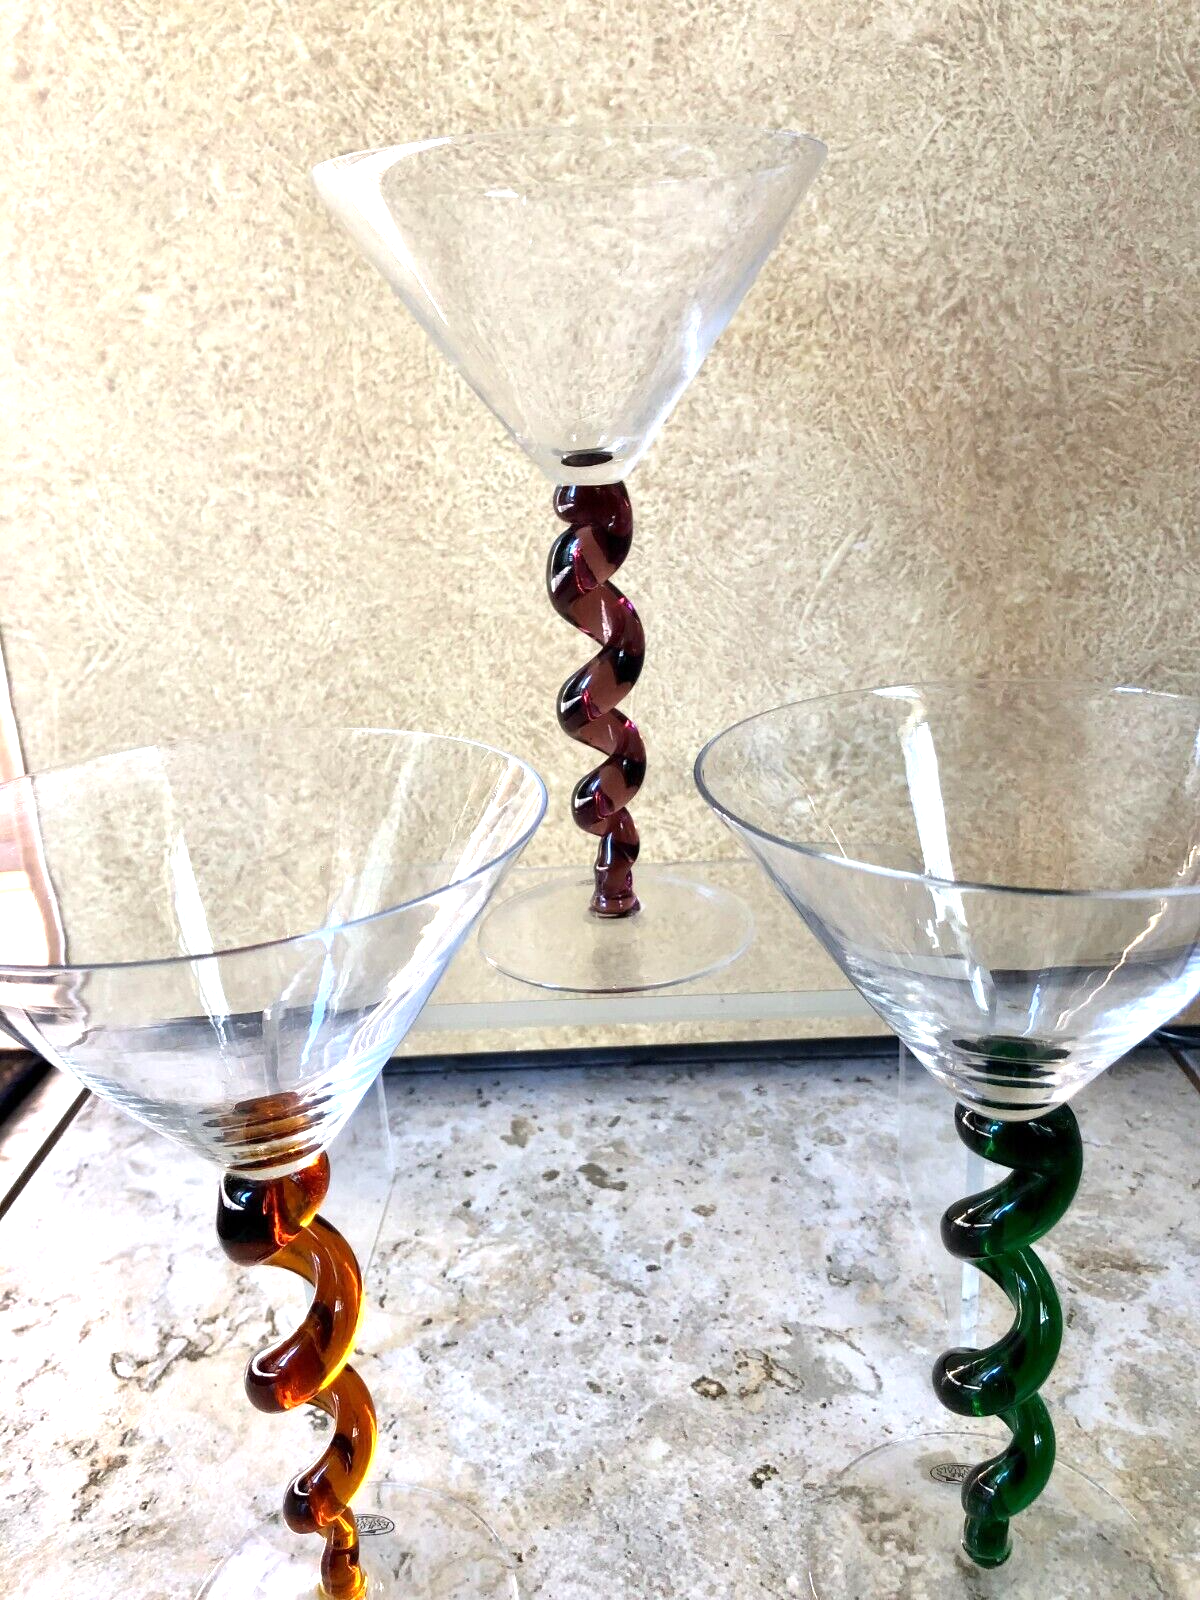 Martini Glasses 1 Brown 1 Purple  1 Green Twisted Spiral Stem 8" Set of 3 New - $60.00